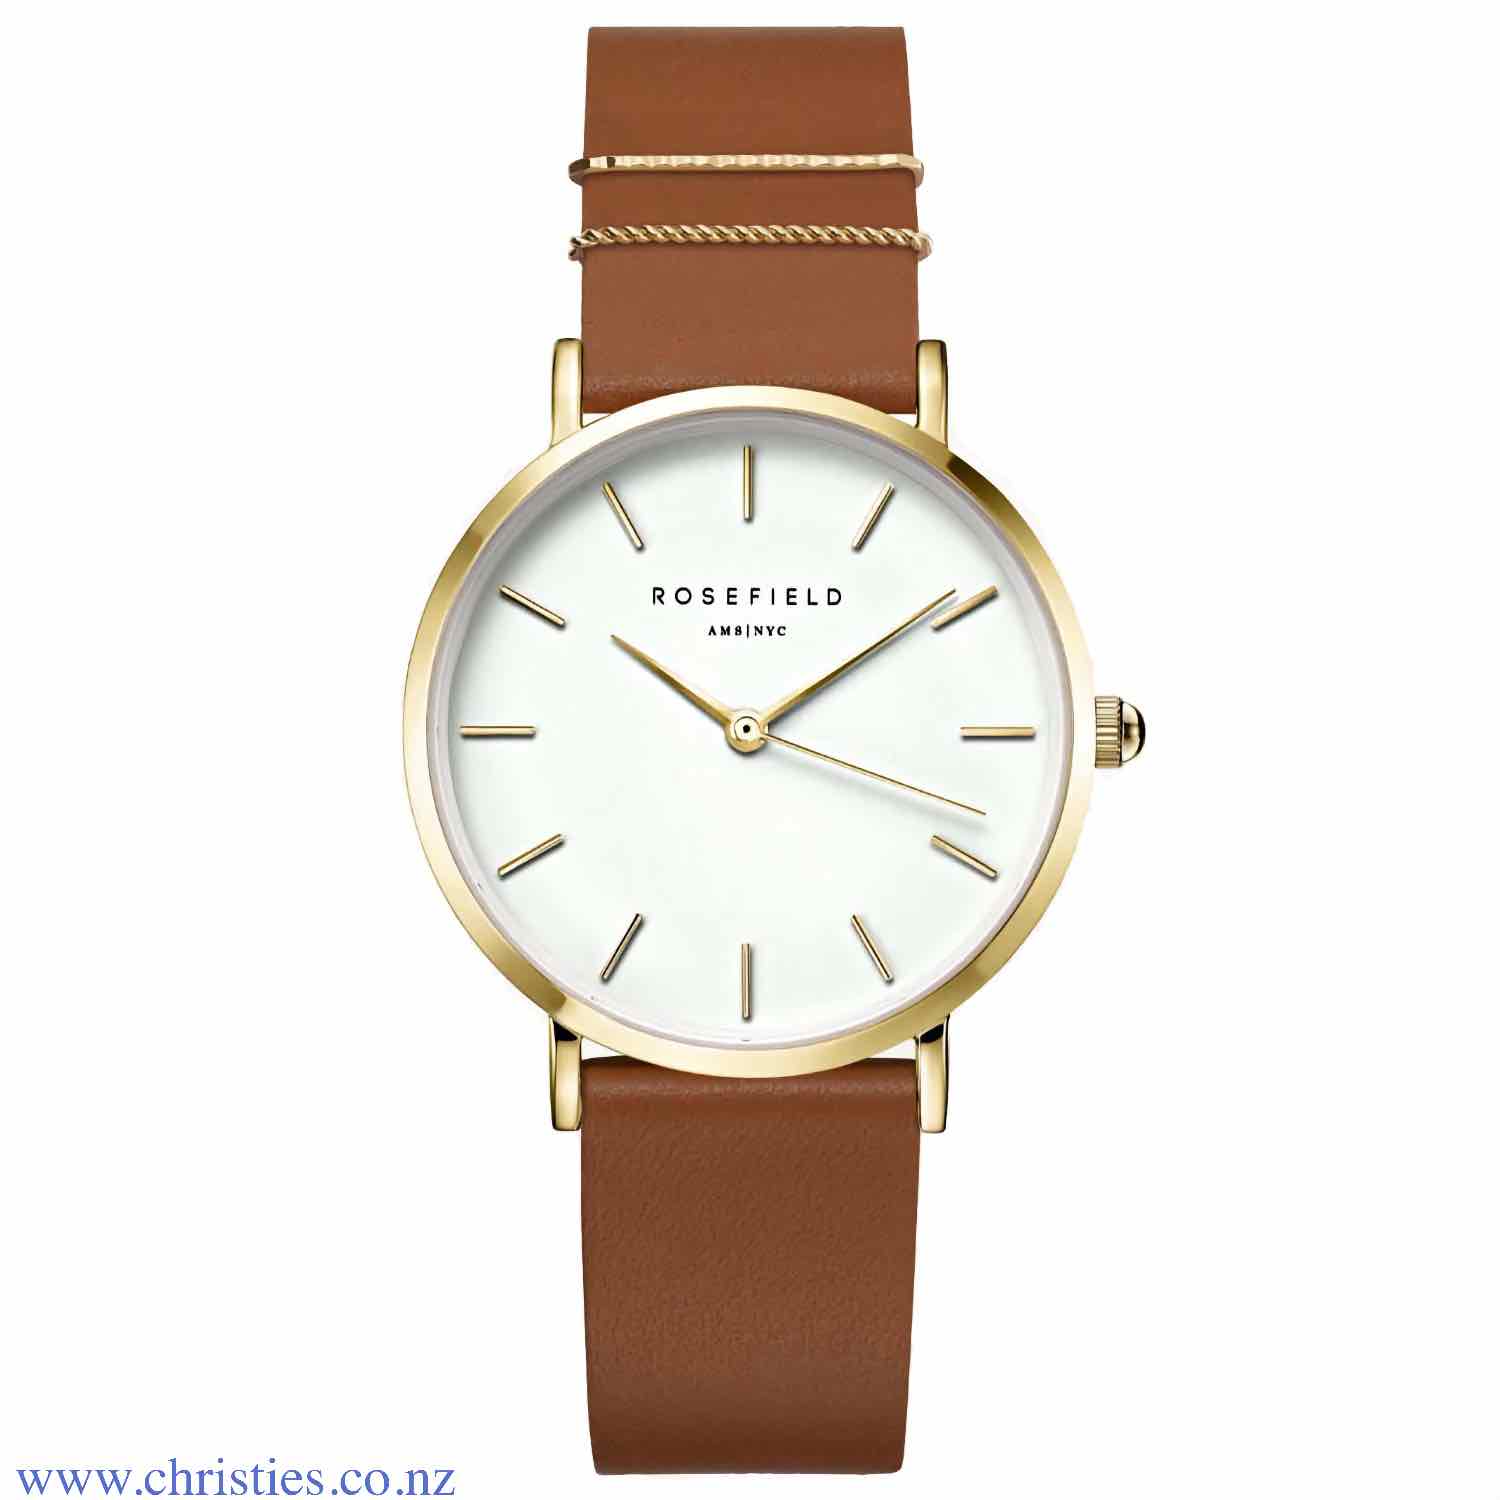 WWCG-W86 Rosefield The West Village Blush Cognac Gold Watch. The West Village collection is inspired by the iconic New York neighbourhood. The velvety nubuck leather straps give the watch a city character, with chic metal rings that keep it classy. Afterp